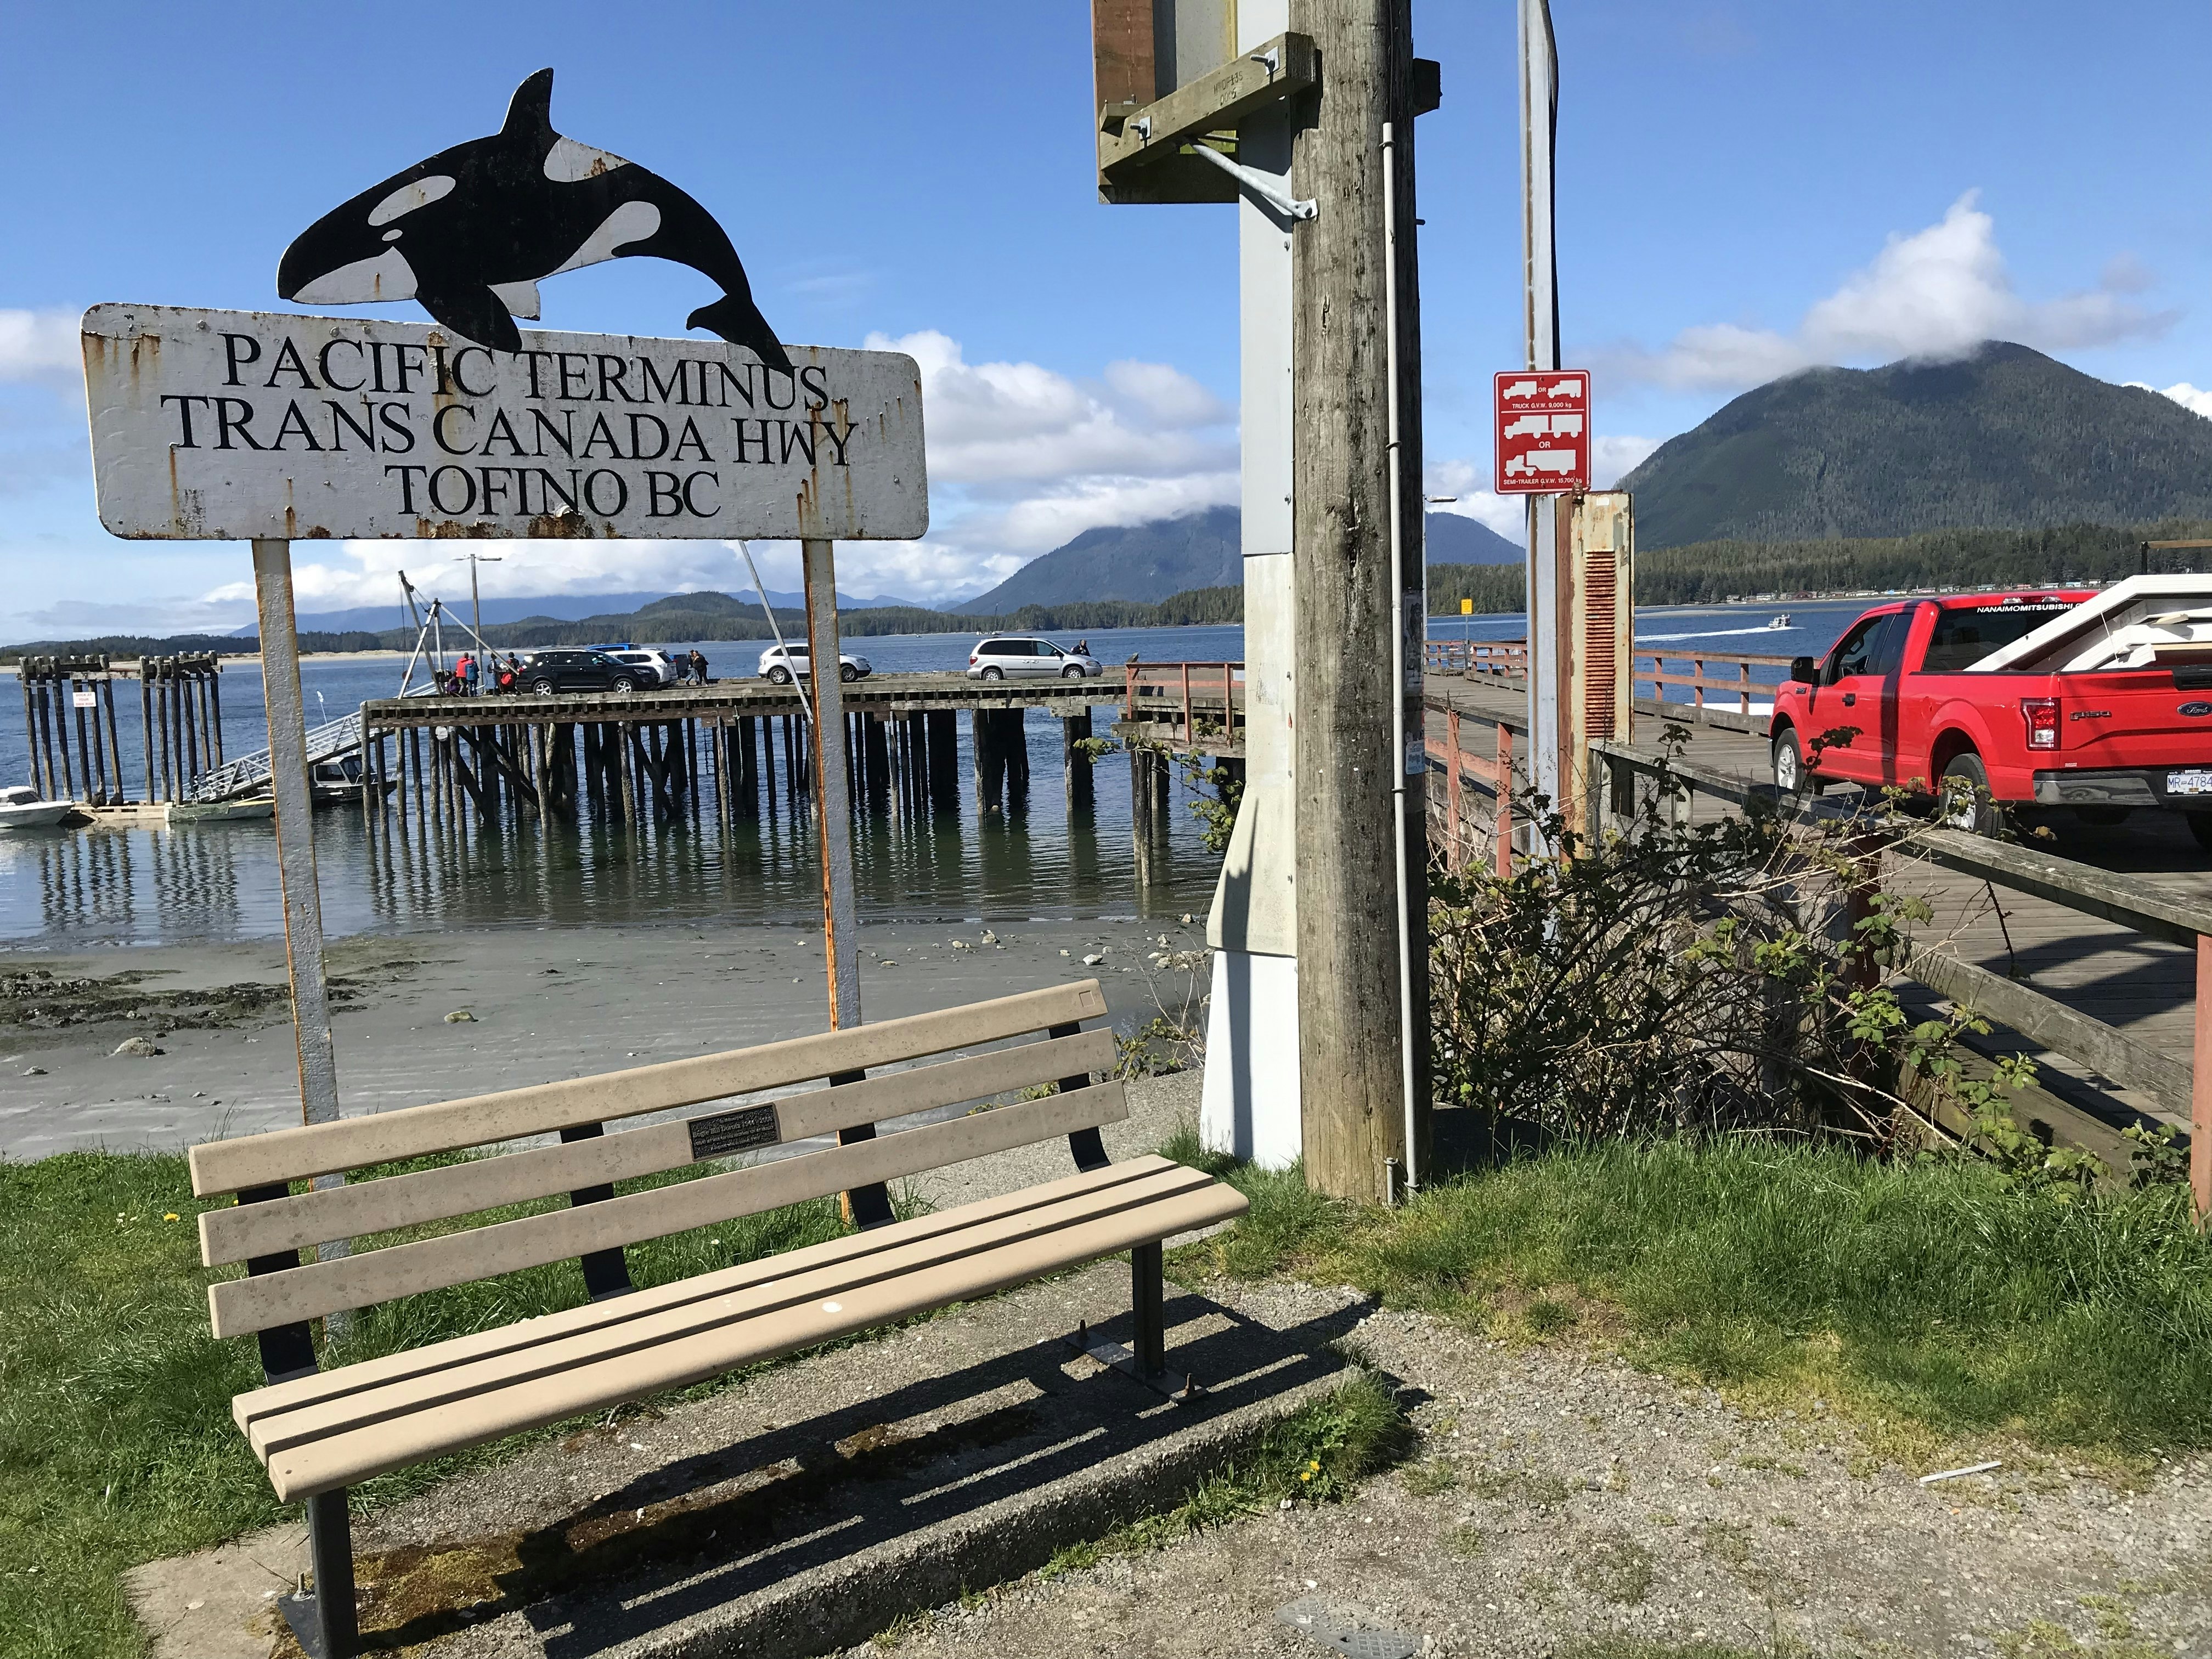 A wooden bench sits with a white, worn metal sign behind it that reads "Pacific Terminus Trans Canada Highway Tofino BC" in a black serif font. An illustration of an orca is cut out of metal and hanging over the sign. In the background, several mini vans and SUVs in white and black pull onto a wooden pier from a steep ramp. A red pickup truck with white objects in the bed drives down the pier.